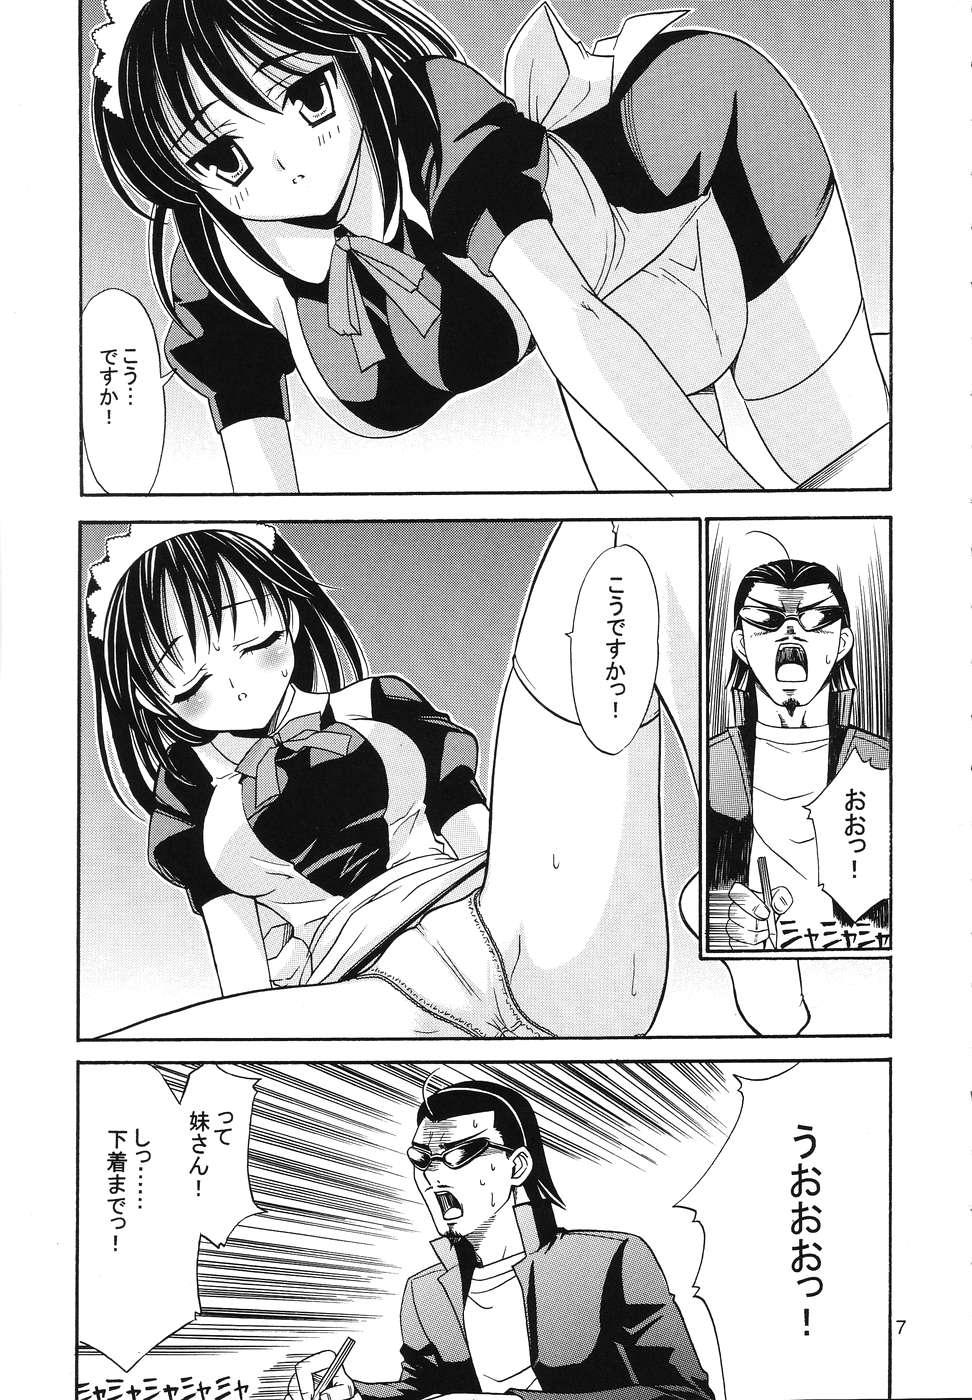 Cumload Hige-seito Harima! 3.5 - School rumble Stretch - Page 6